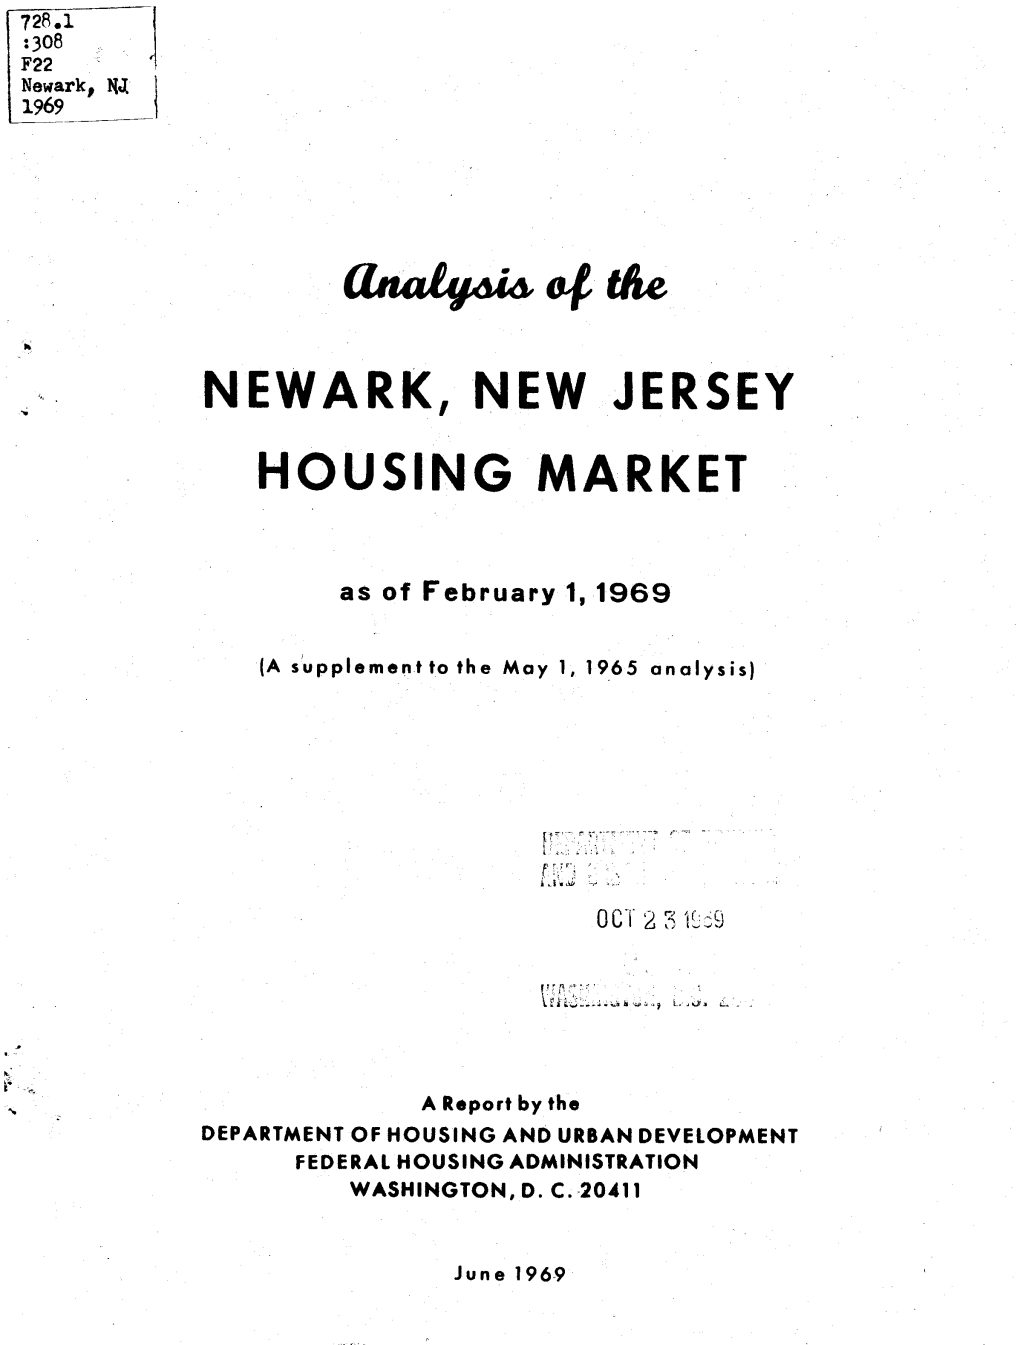 Analysis of the Newark, New Jersey Housing Market As Of